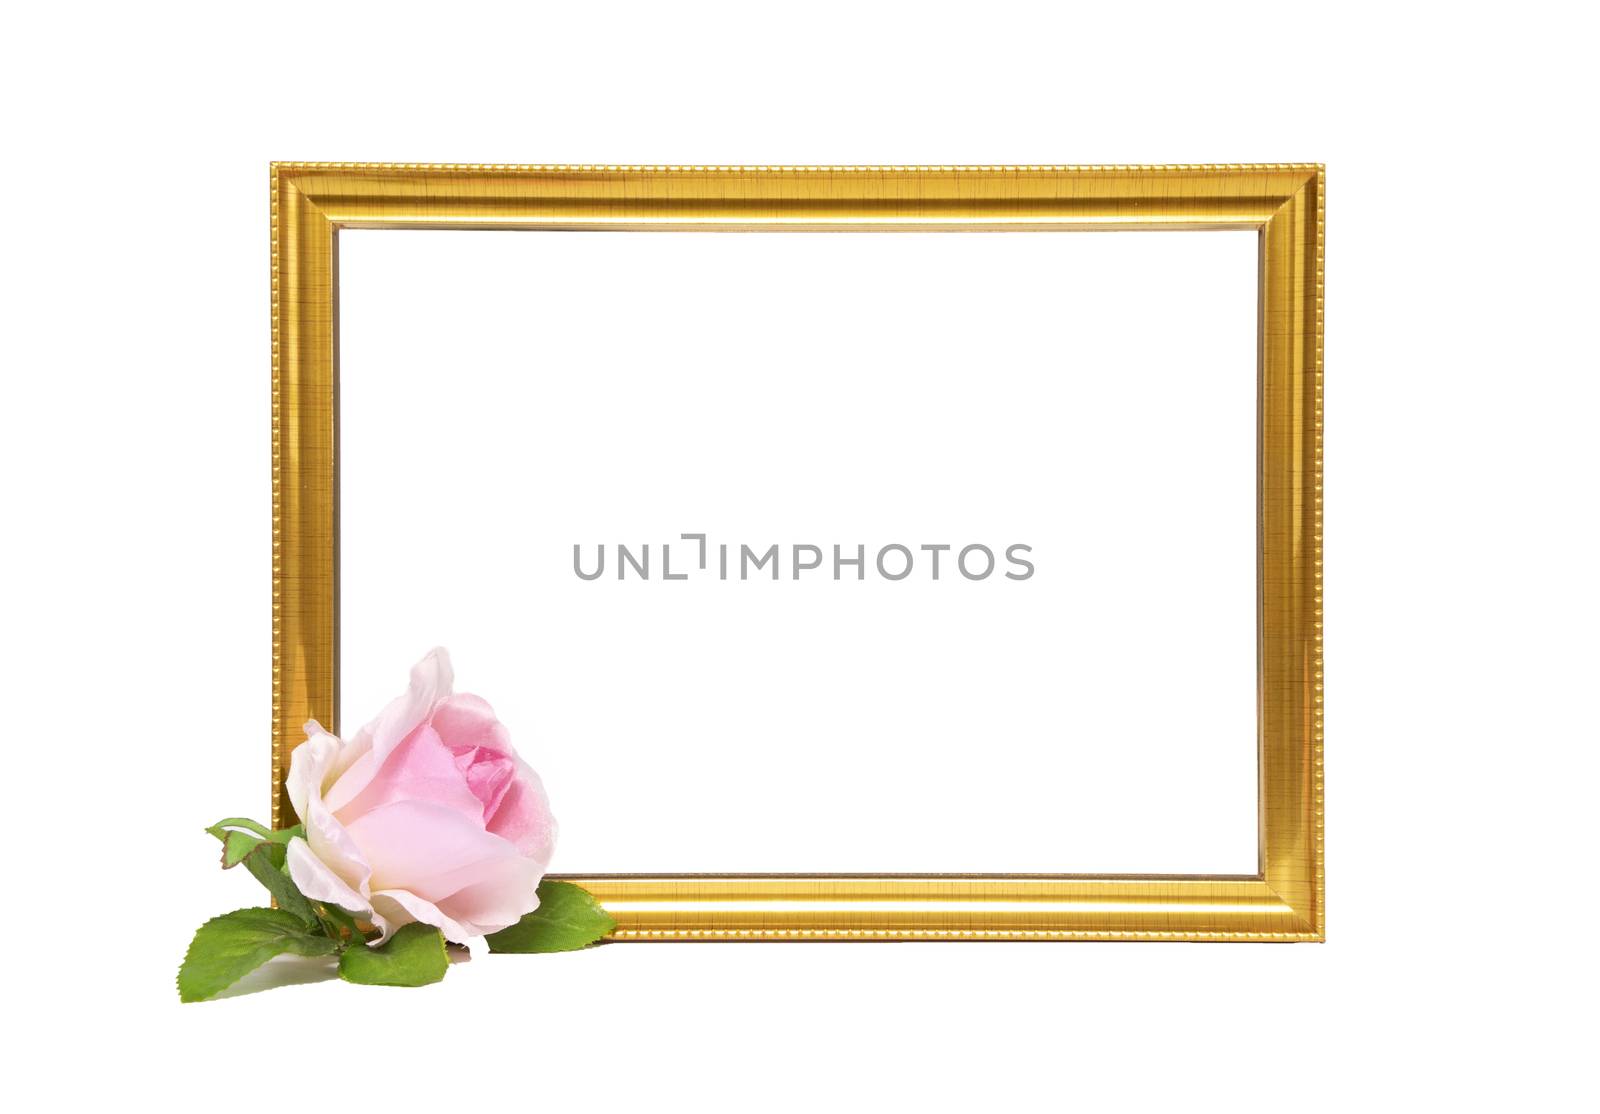 Gold frame and pink rose by Nawoot